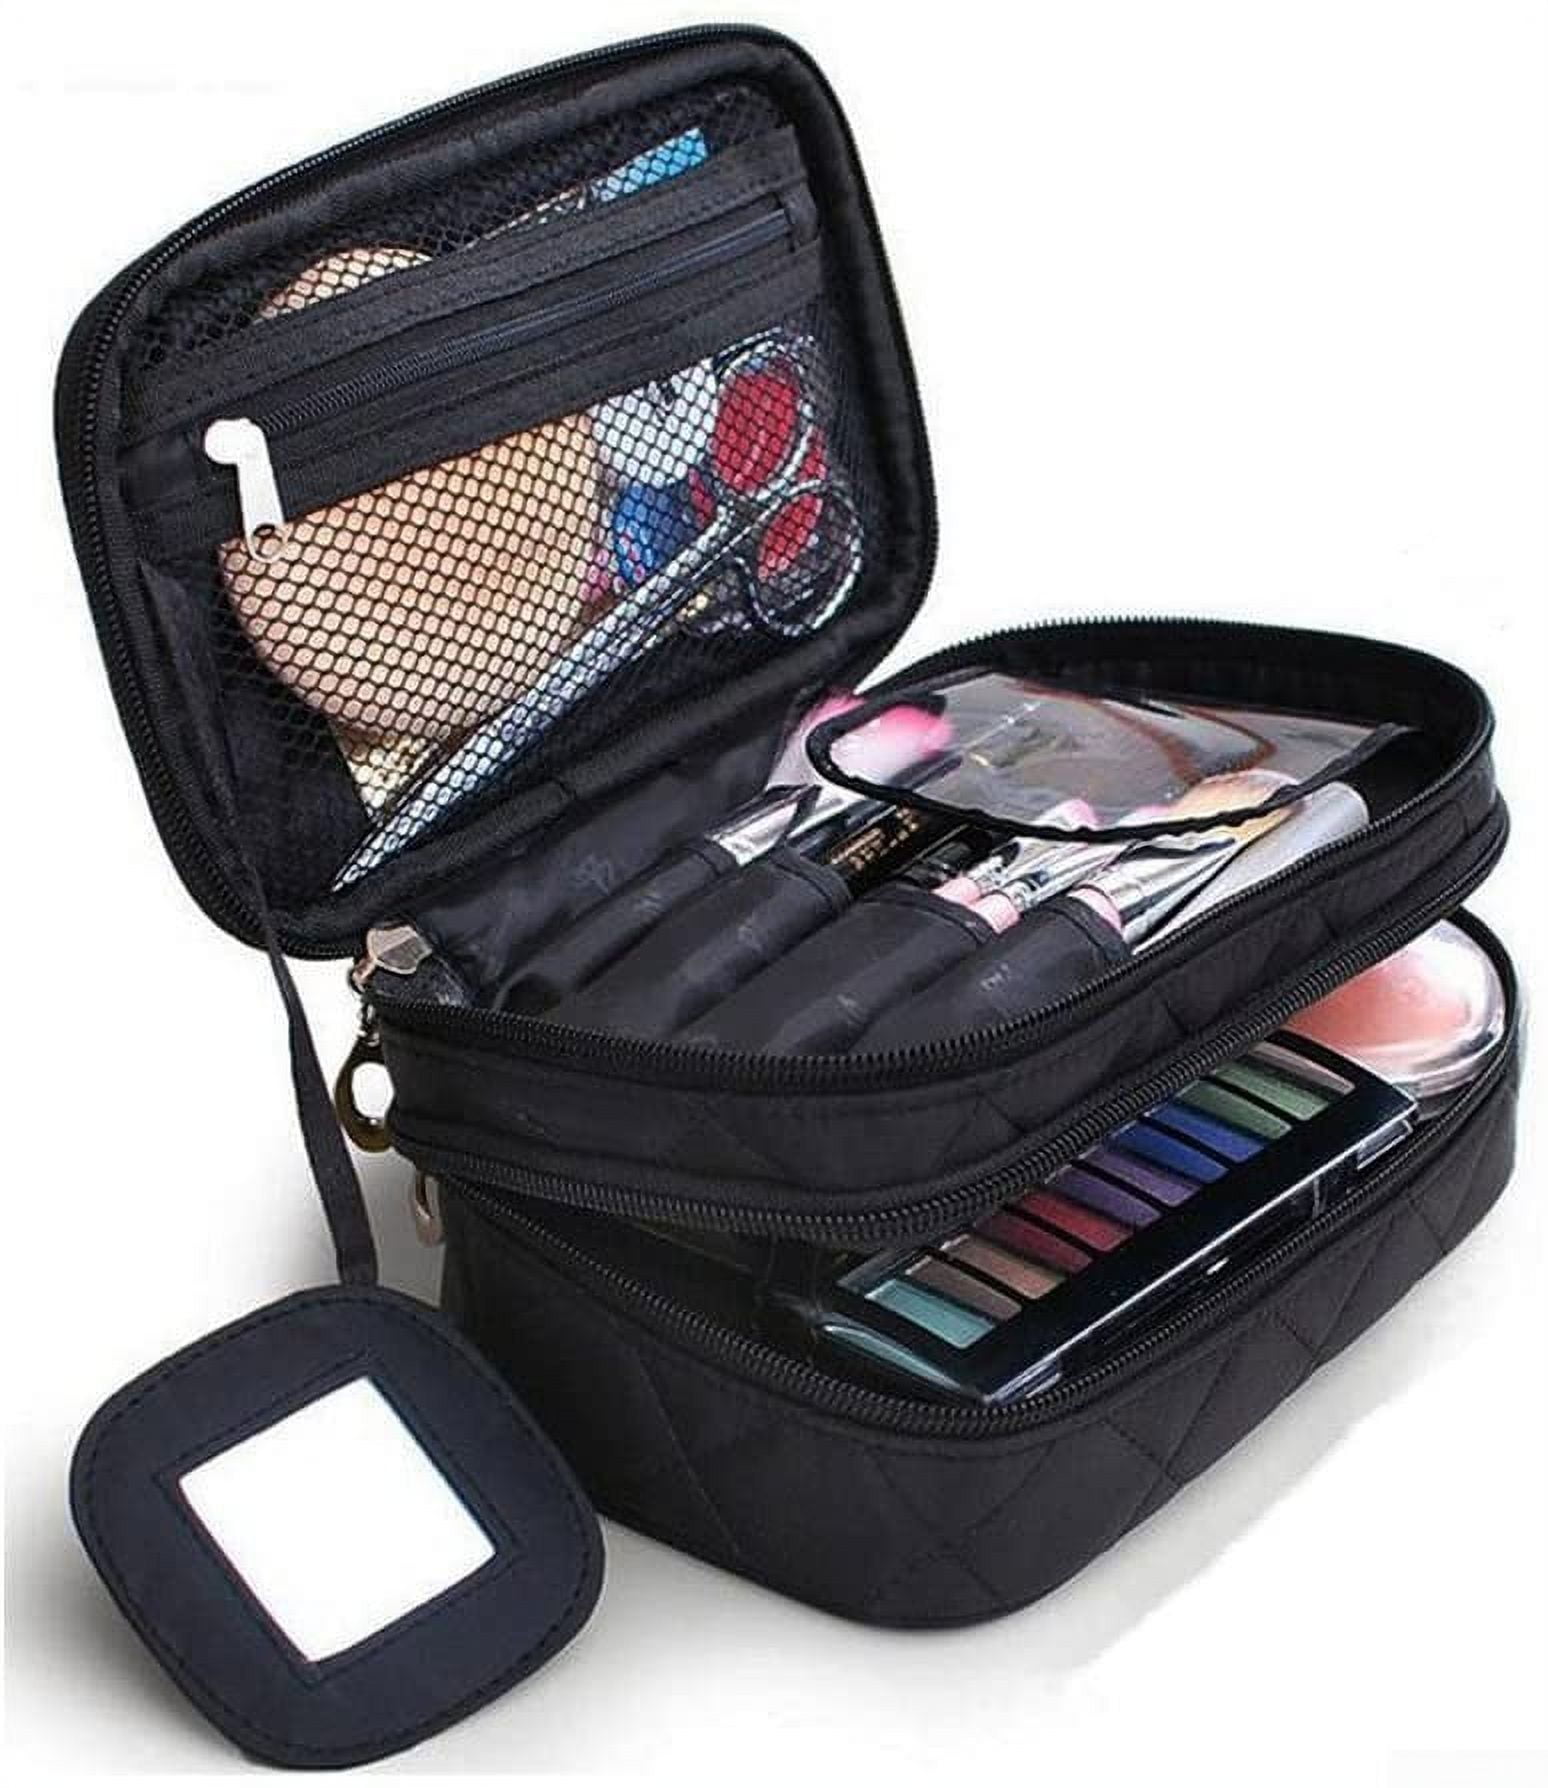 Nexpure Makeup Bag, Large Travel Makeup Bag Organizer Cosmetic Bags for Women Washable Make Up Bag Toiletry Bag with Handle and Divider Cosmetic Bags